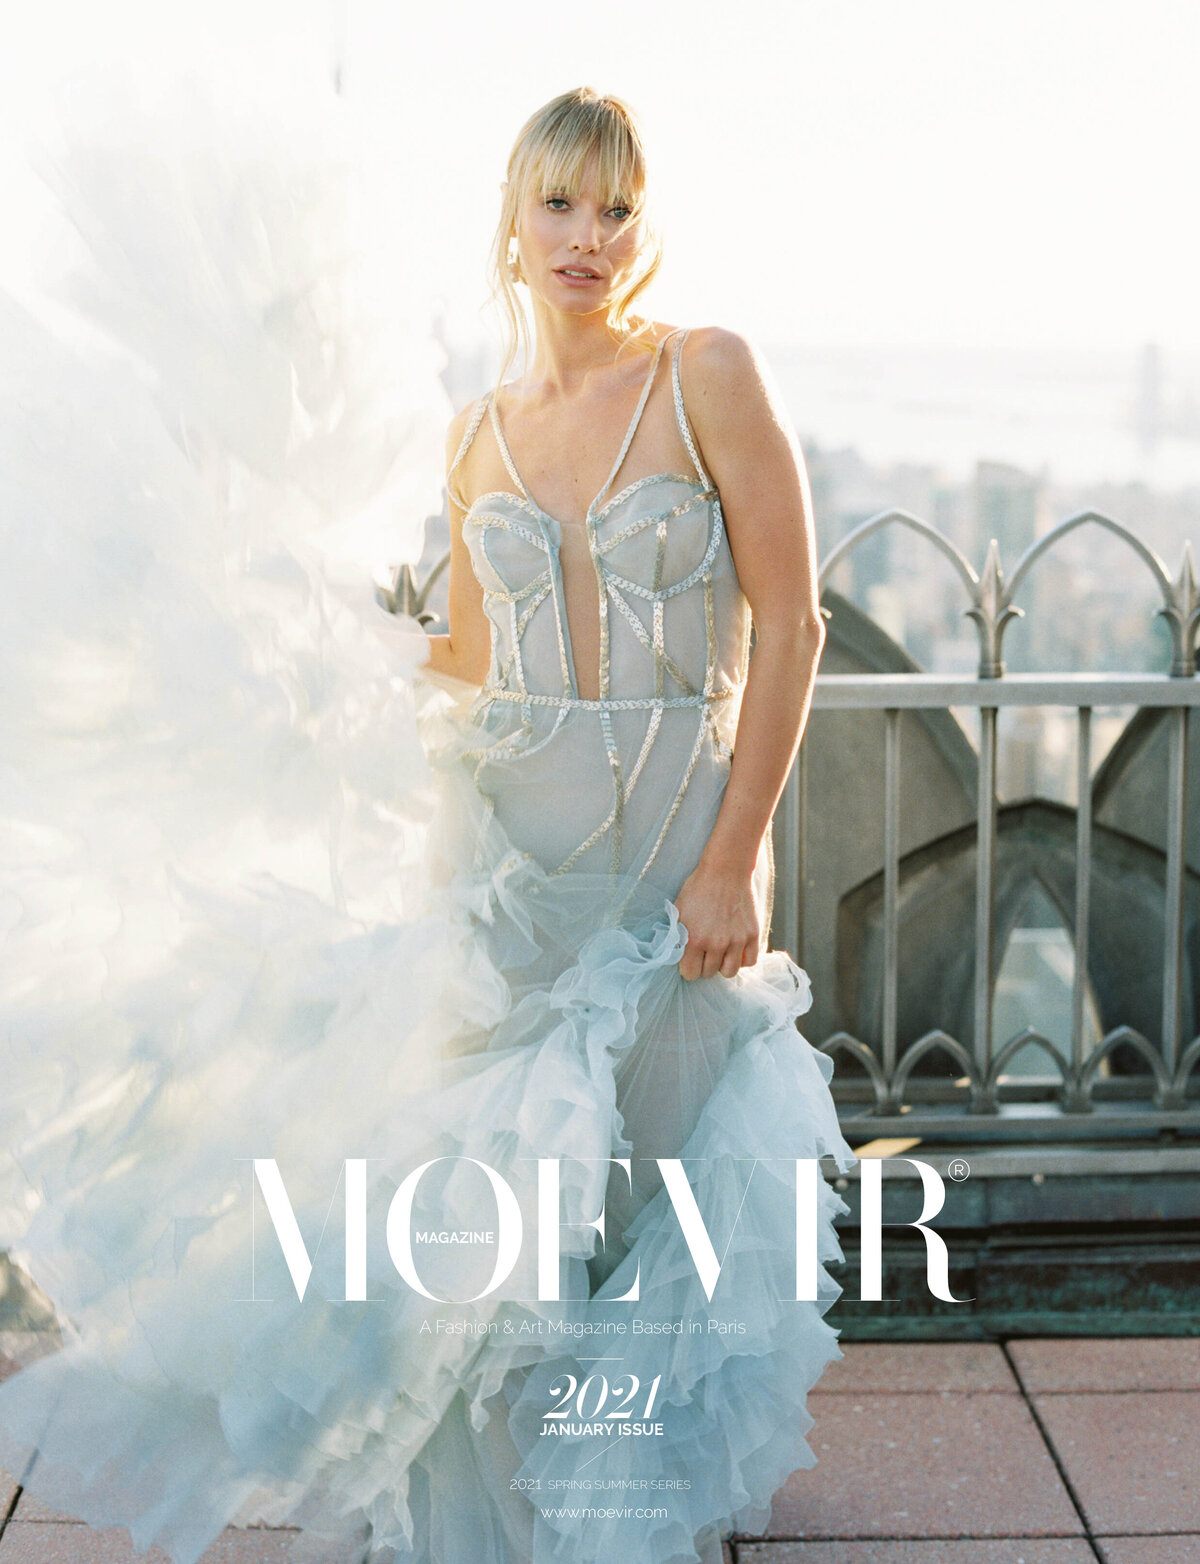 A Moevir Magazine January Issue 20213